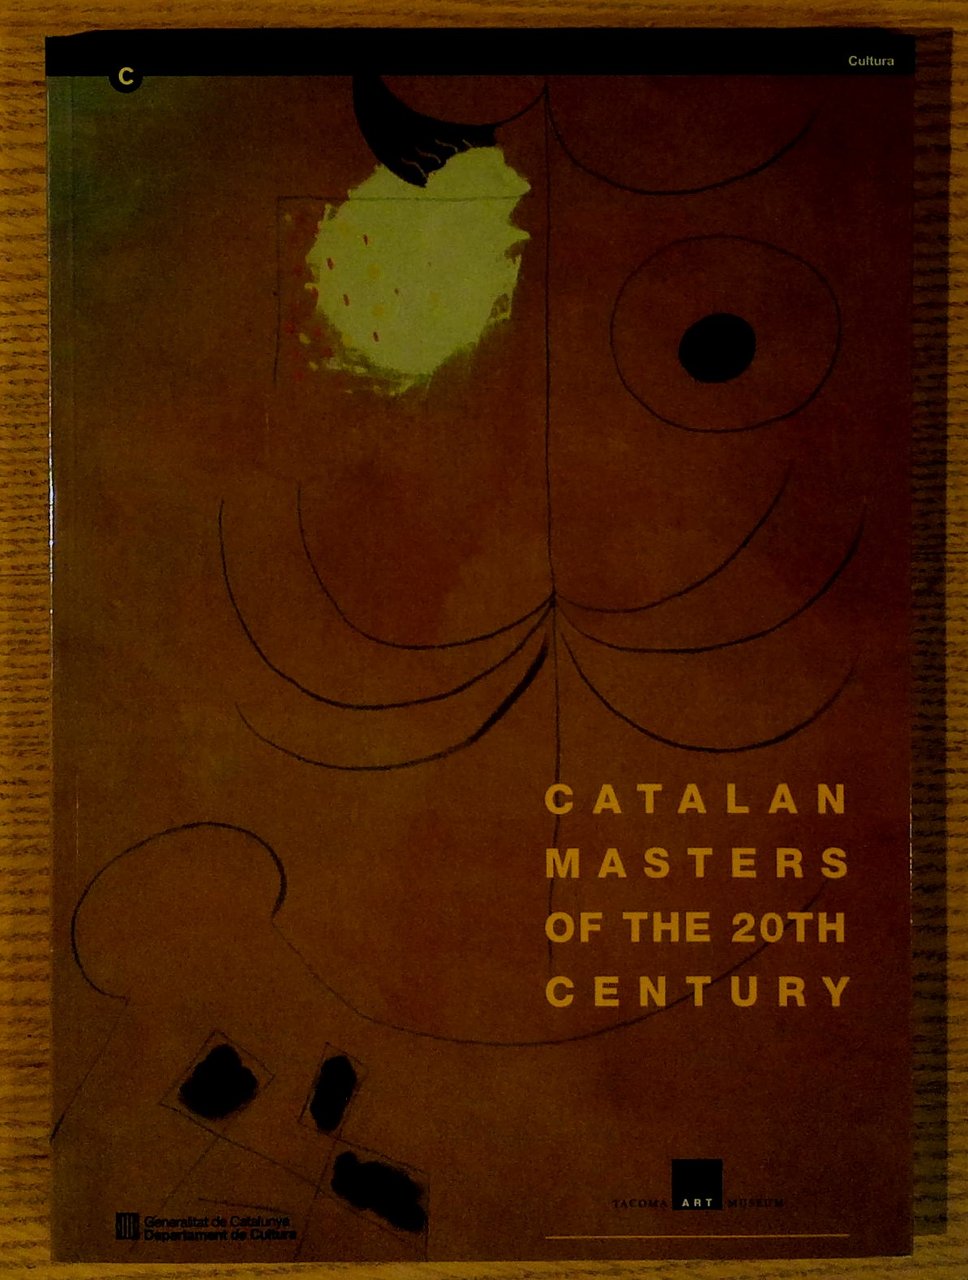 Catalan Masters of the 20th Century